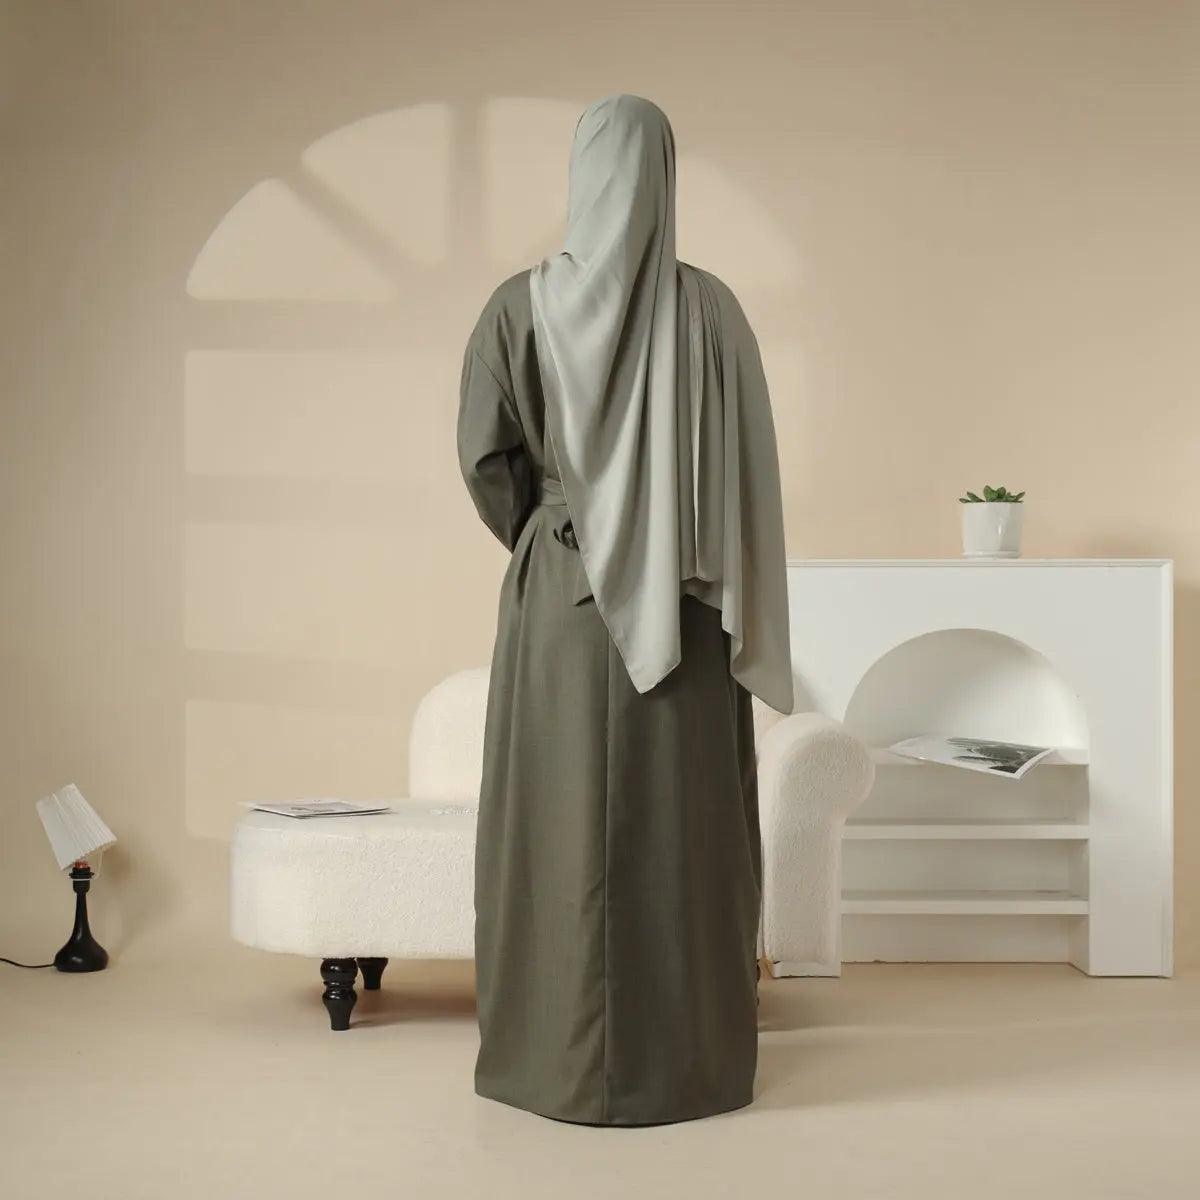 MA043 Linen Plain Abaya with Pockets 2-Piece Set - Mariam's Collection